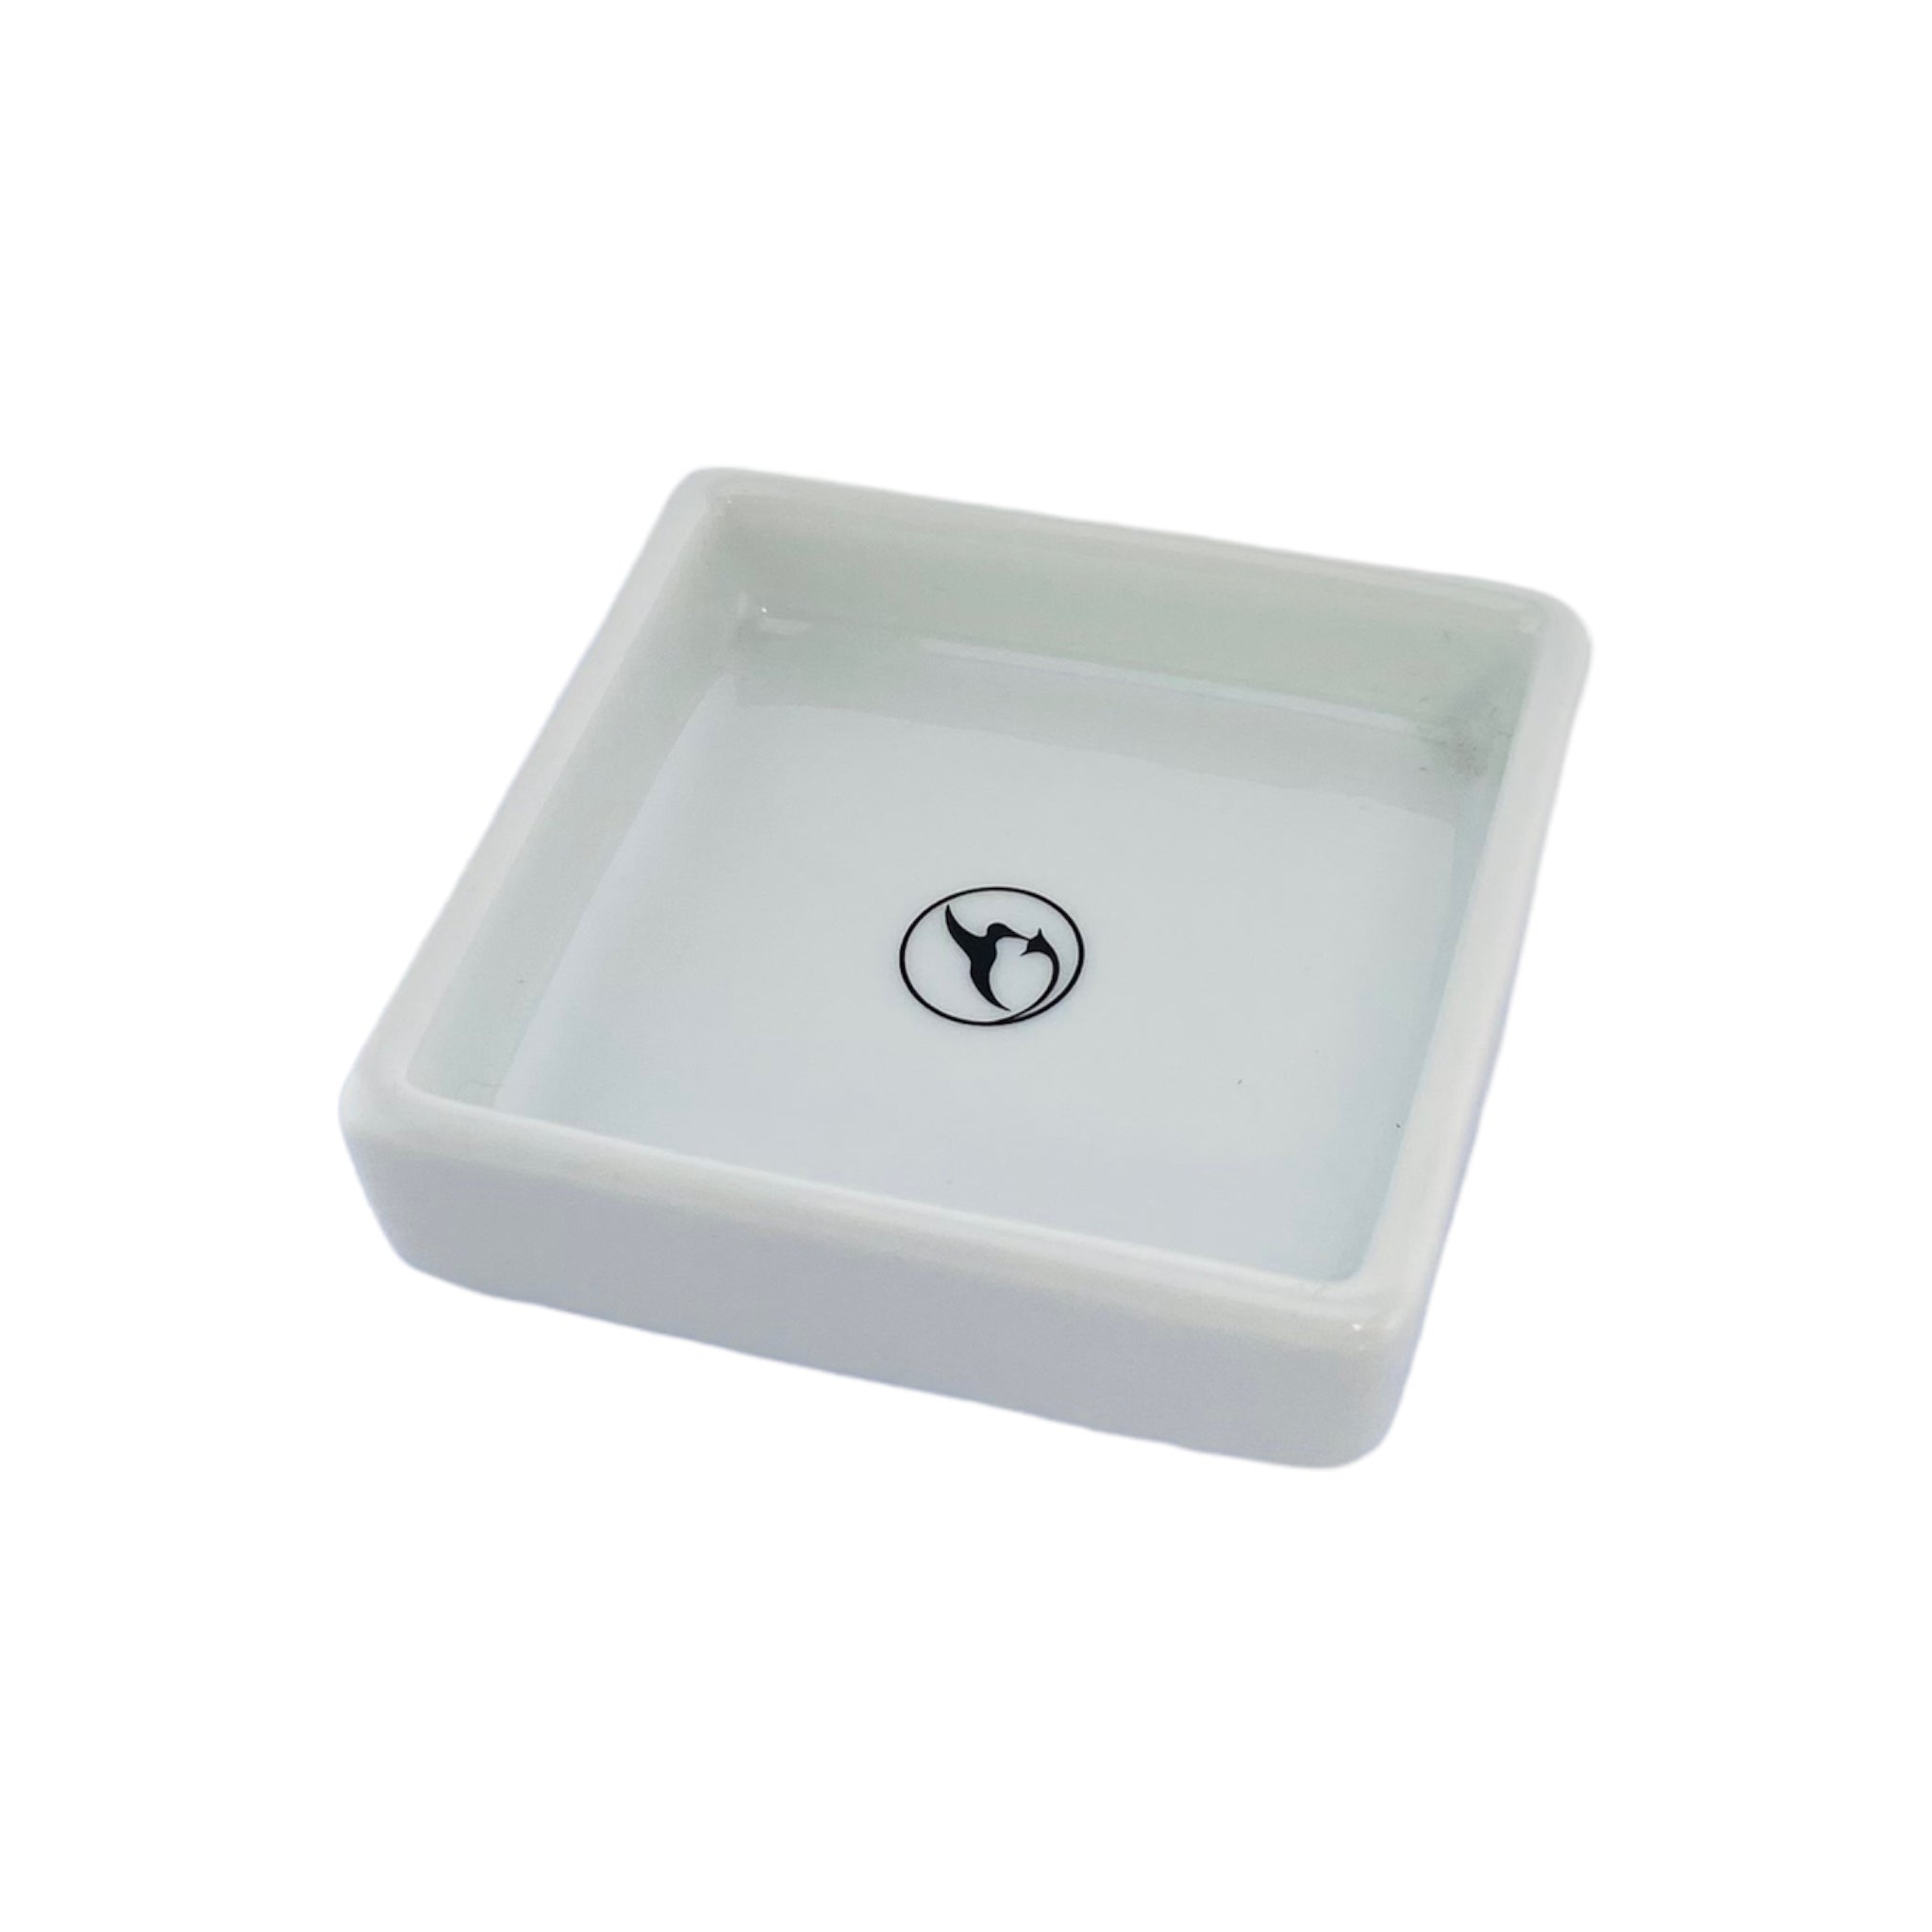 Nectar Collector Square Ceramic Dish best cheap durable portable